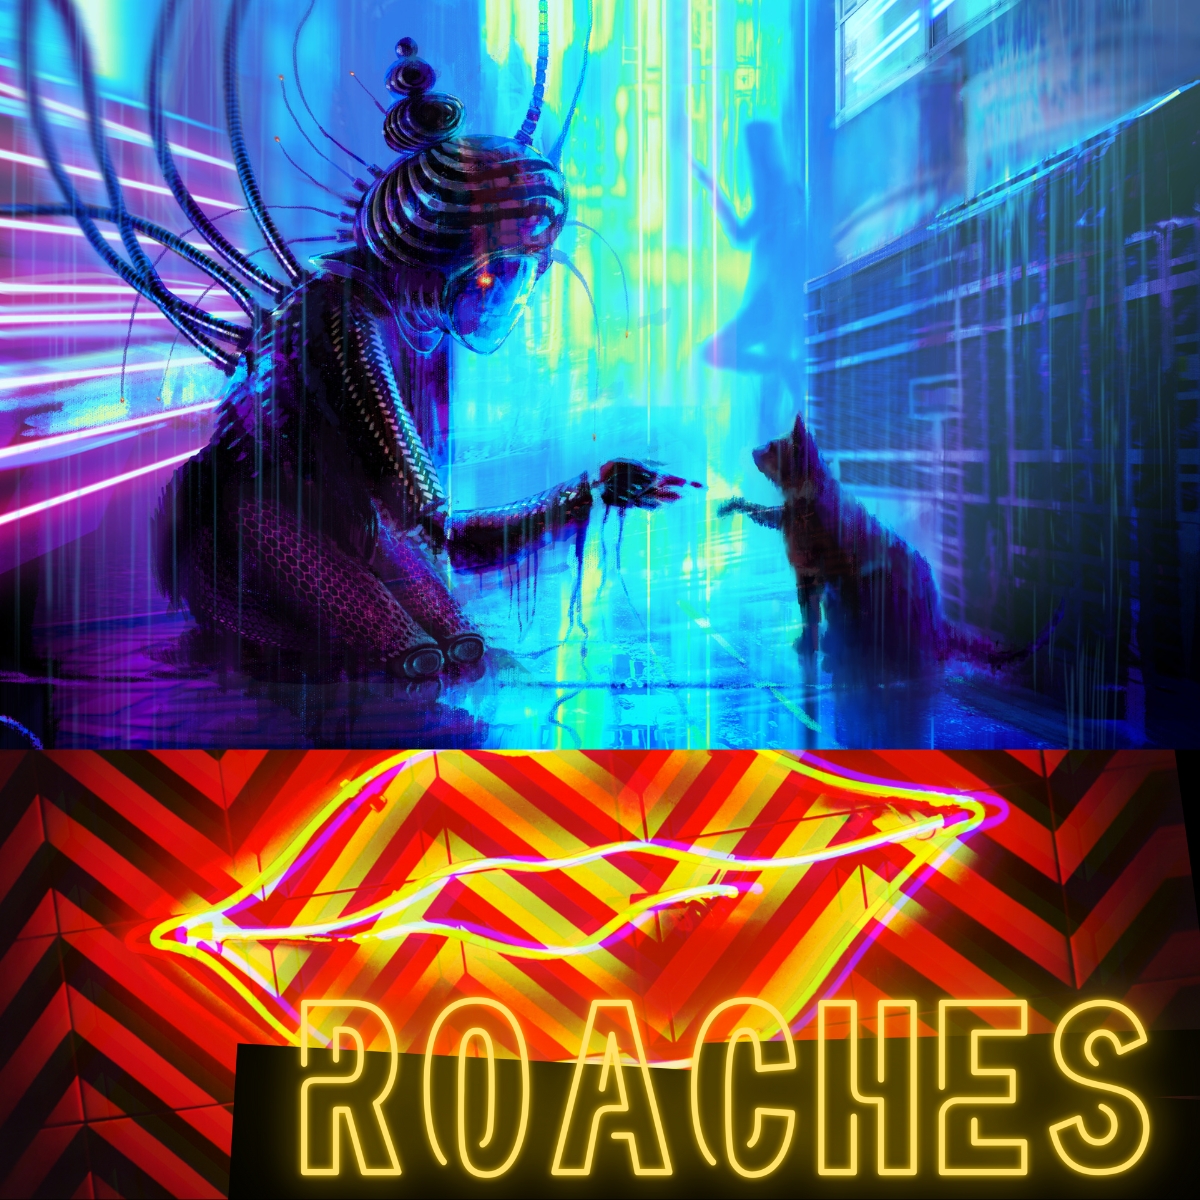 New audio story from Dark Matter Audiolab: 'Roaches' by @AiJiang_ from Issue 009. darkmatteraudiolab.com Narrator: @AinsleighBarber Sound: @youseethehat Production: @philmclaughlin